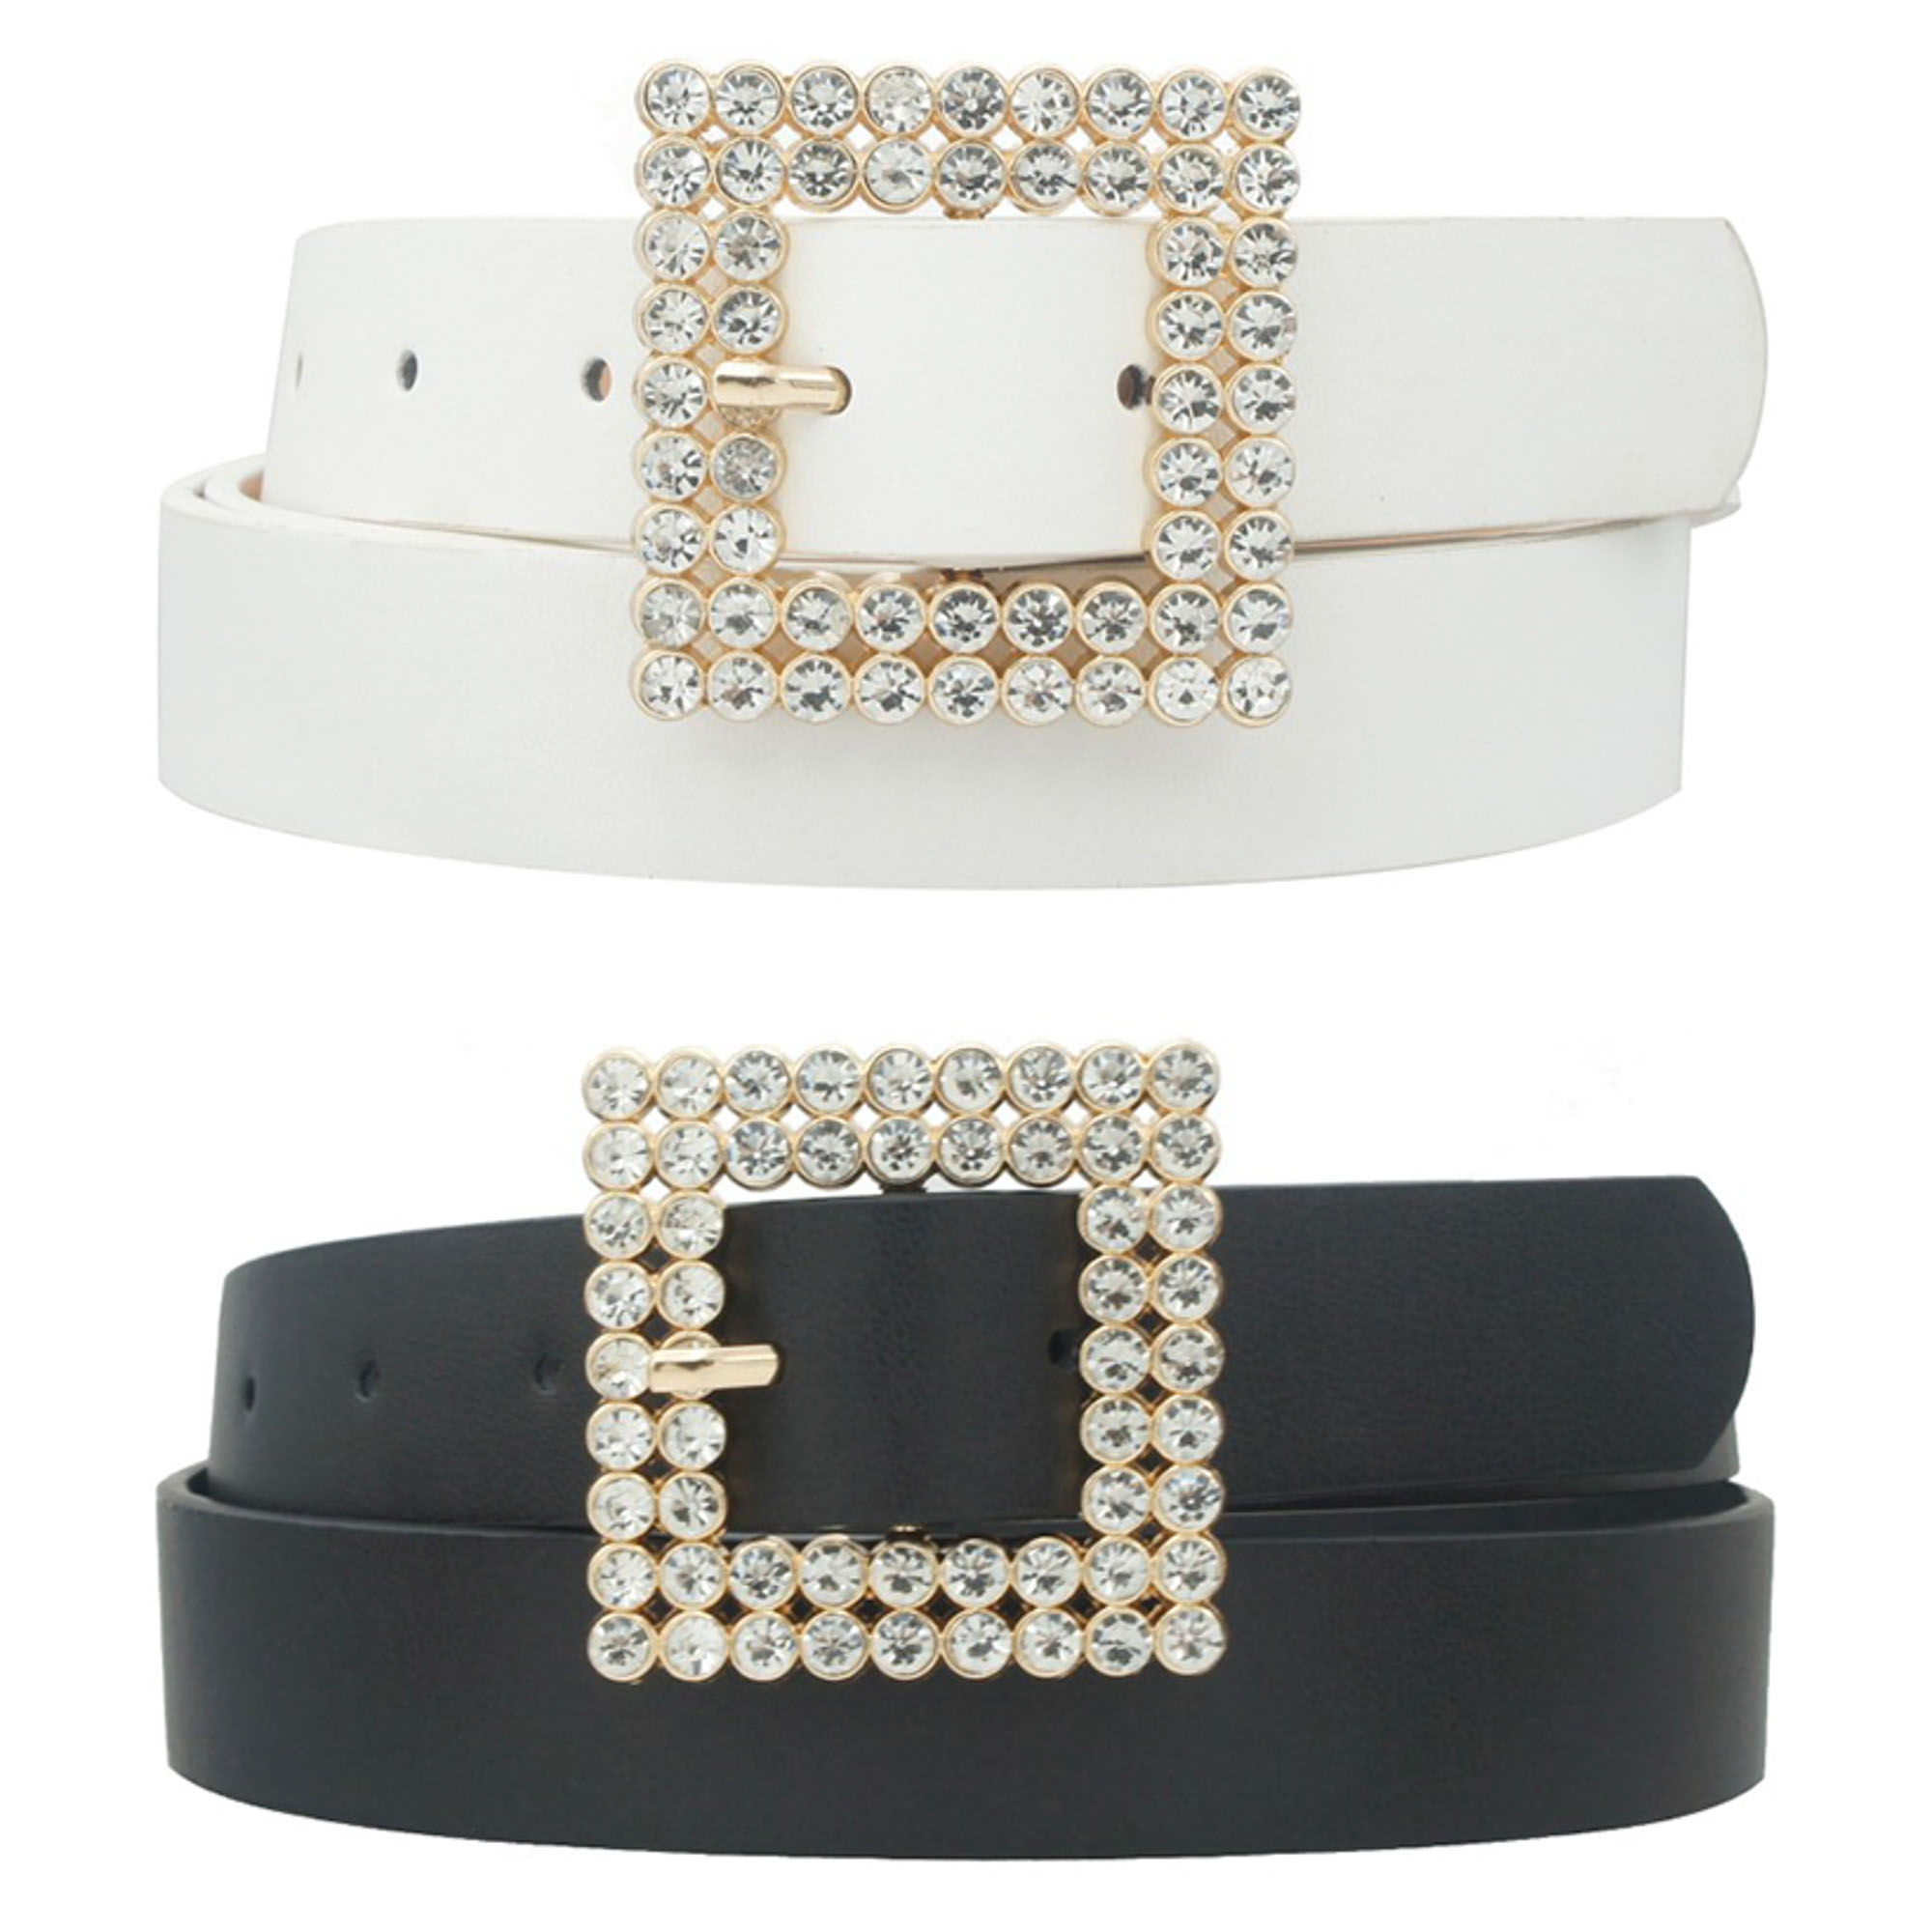 PLUS SIZE DOUBLE ROW SQUARE BUCKLE DUO BELT